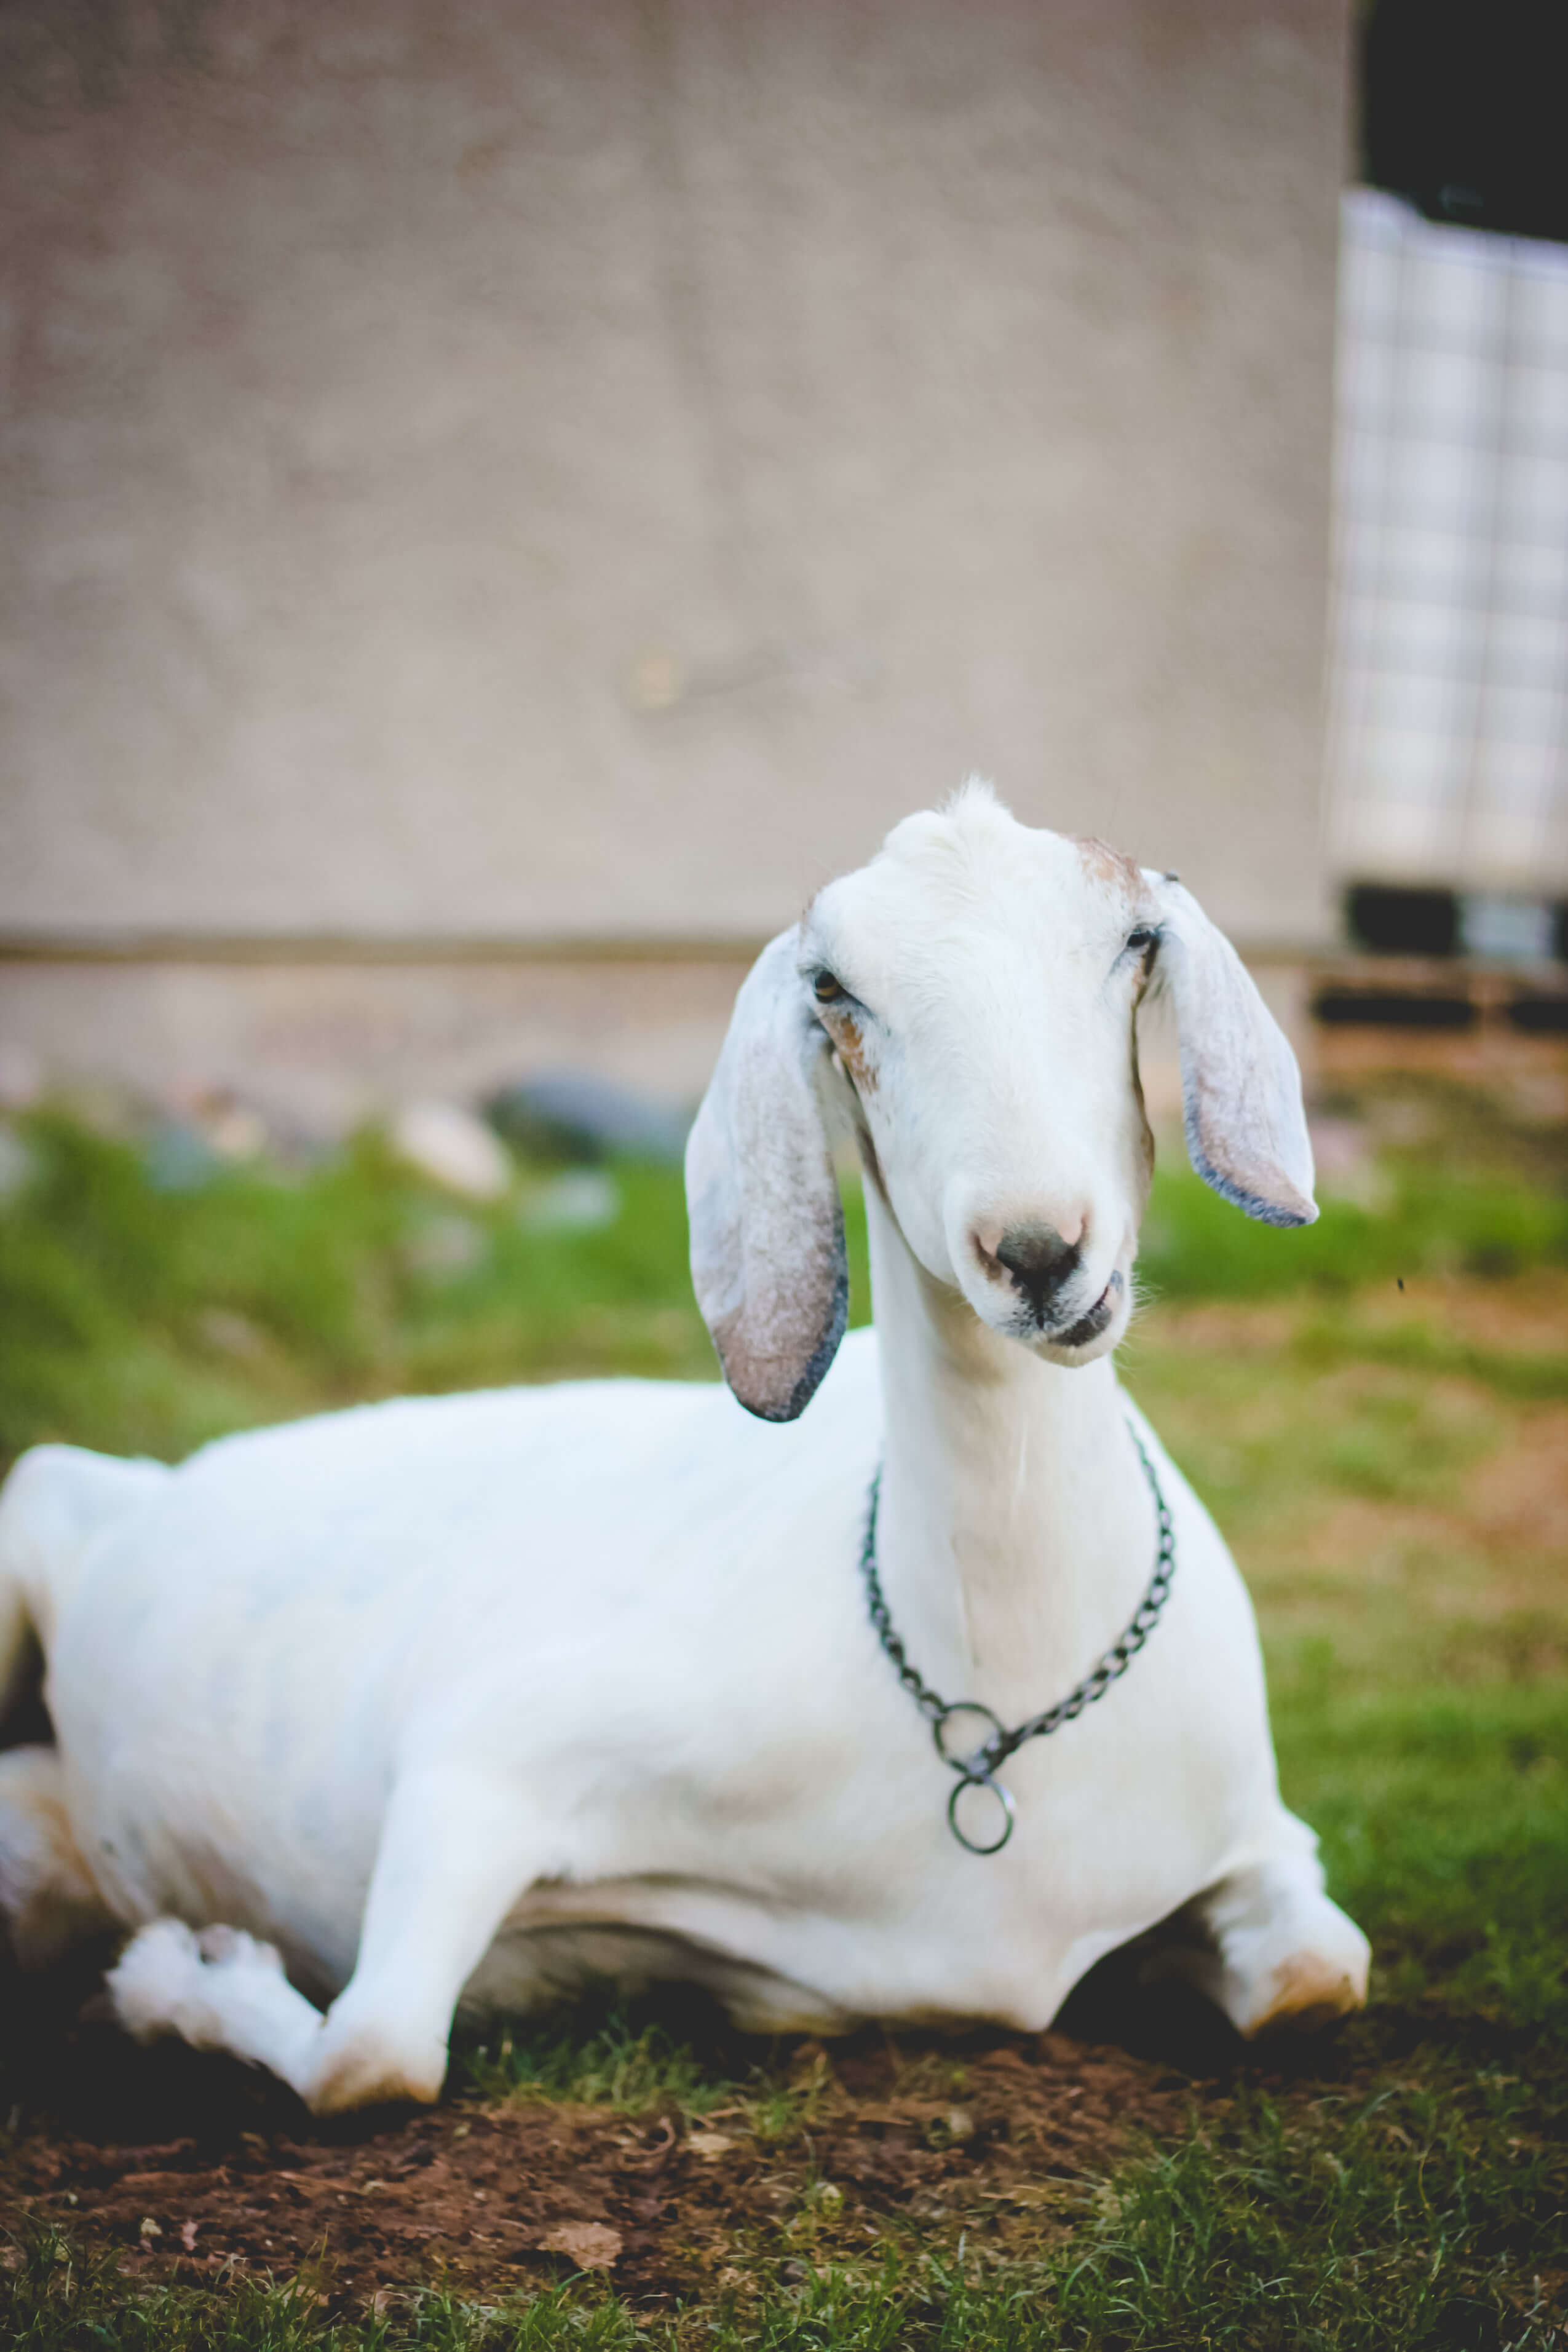 Naturally deworming a goat.